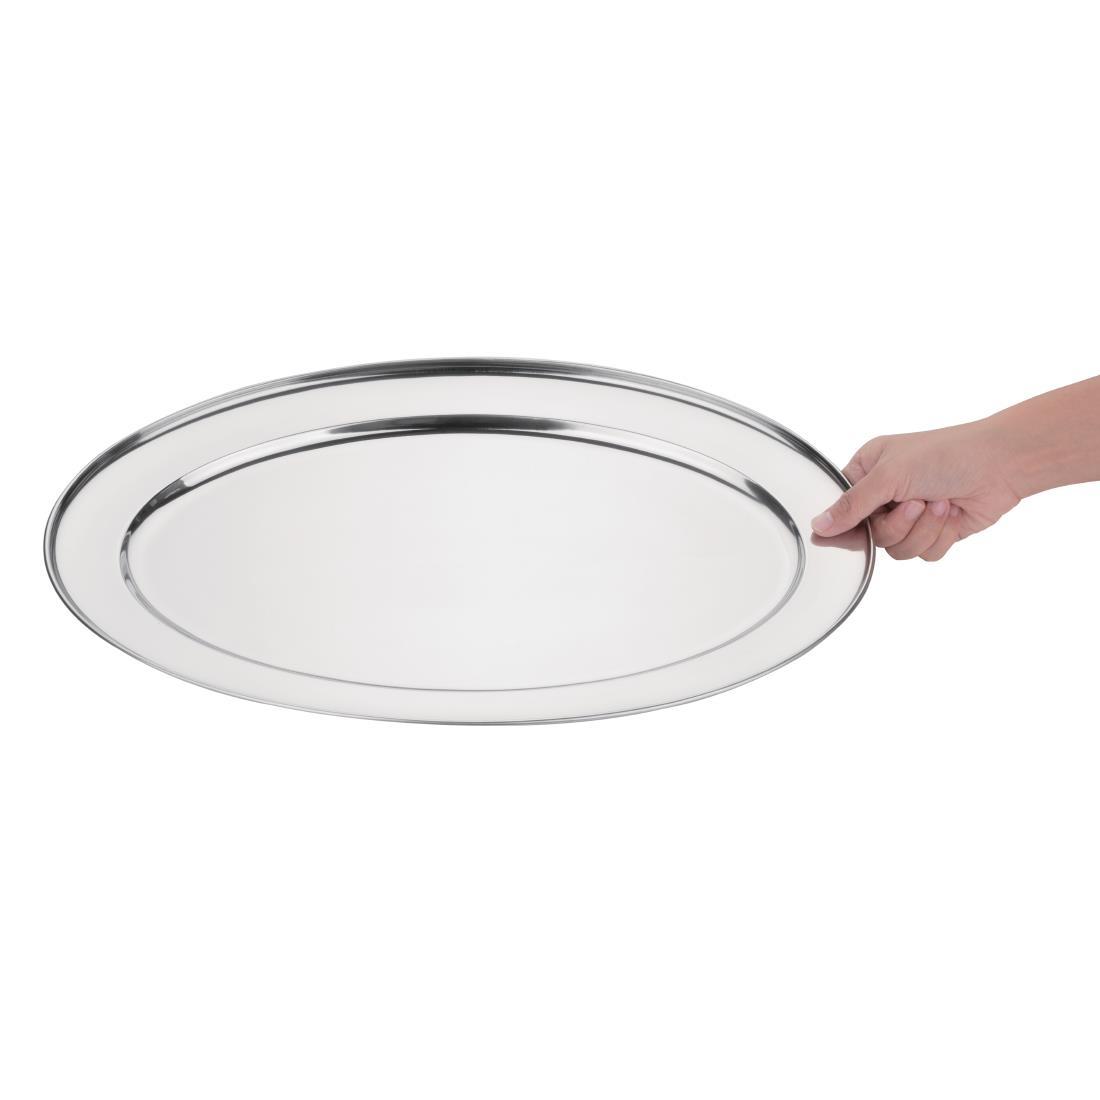 Olympia Stainless Steel Oval Serving Tray 500mm - K367  - 4